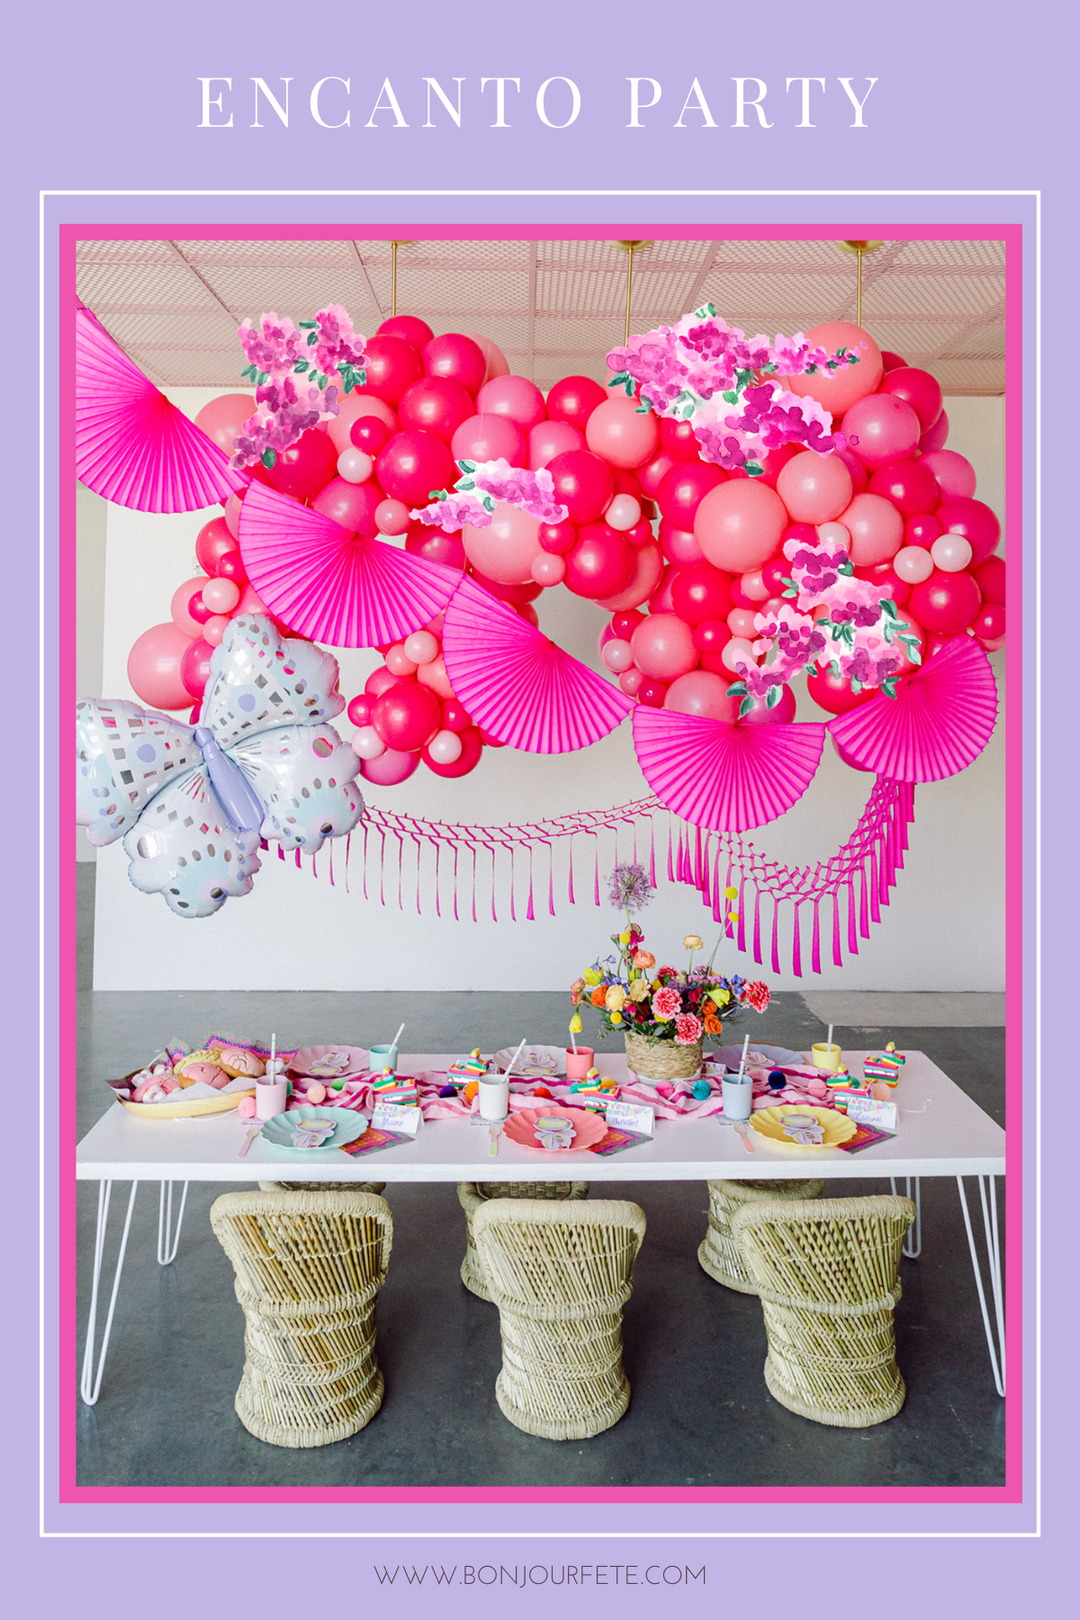 ENCANTO BIRTHDAY PARTY IDEAS AND FIESTA DECORATIONS